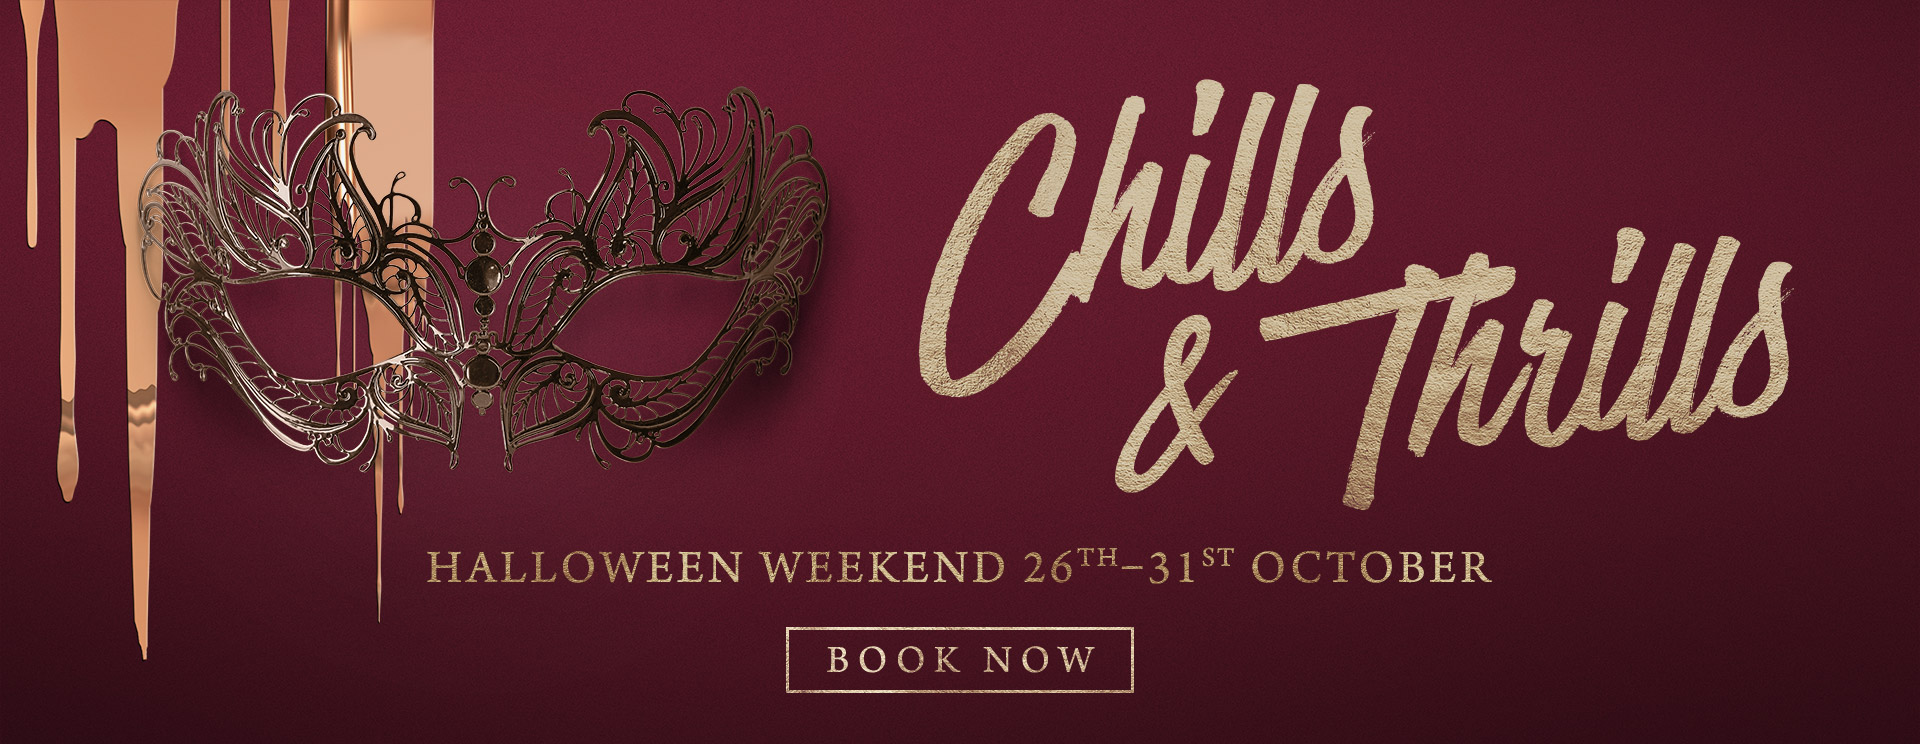 Chills & Thrills this Halloween at The Victoria